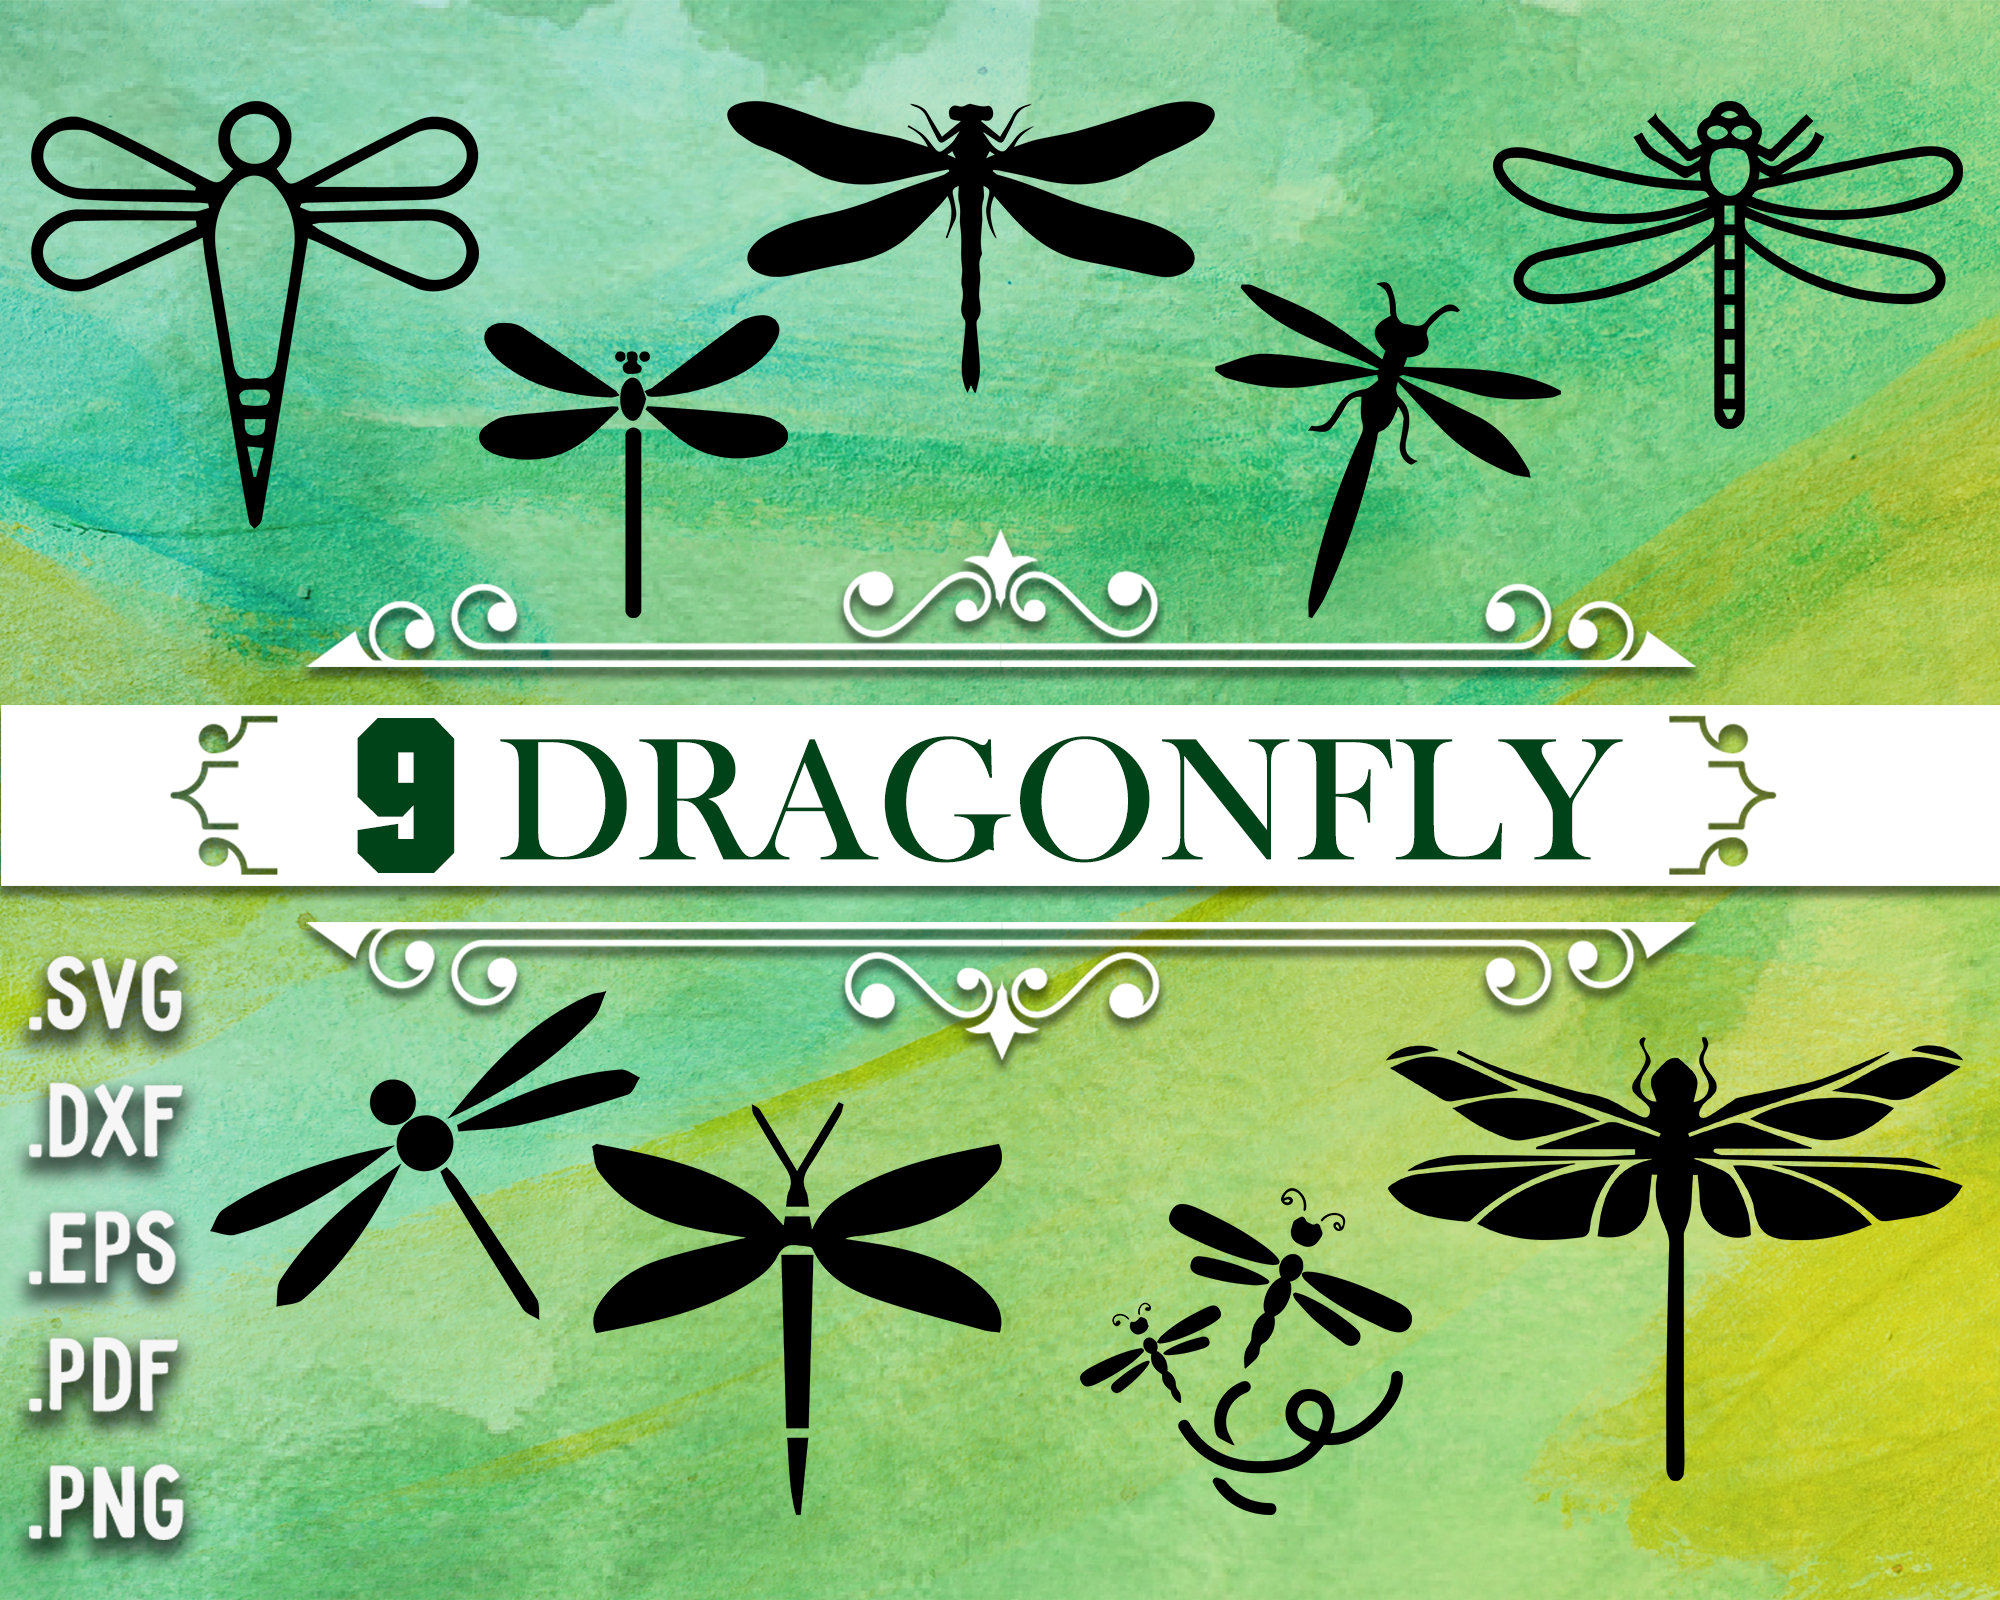 Download Dragonfly Svg Dragonfly Clipart Dragonfly Dragonfly Vector Etsy